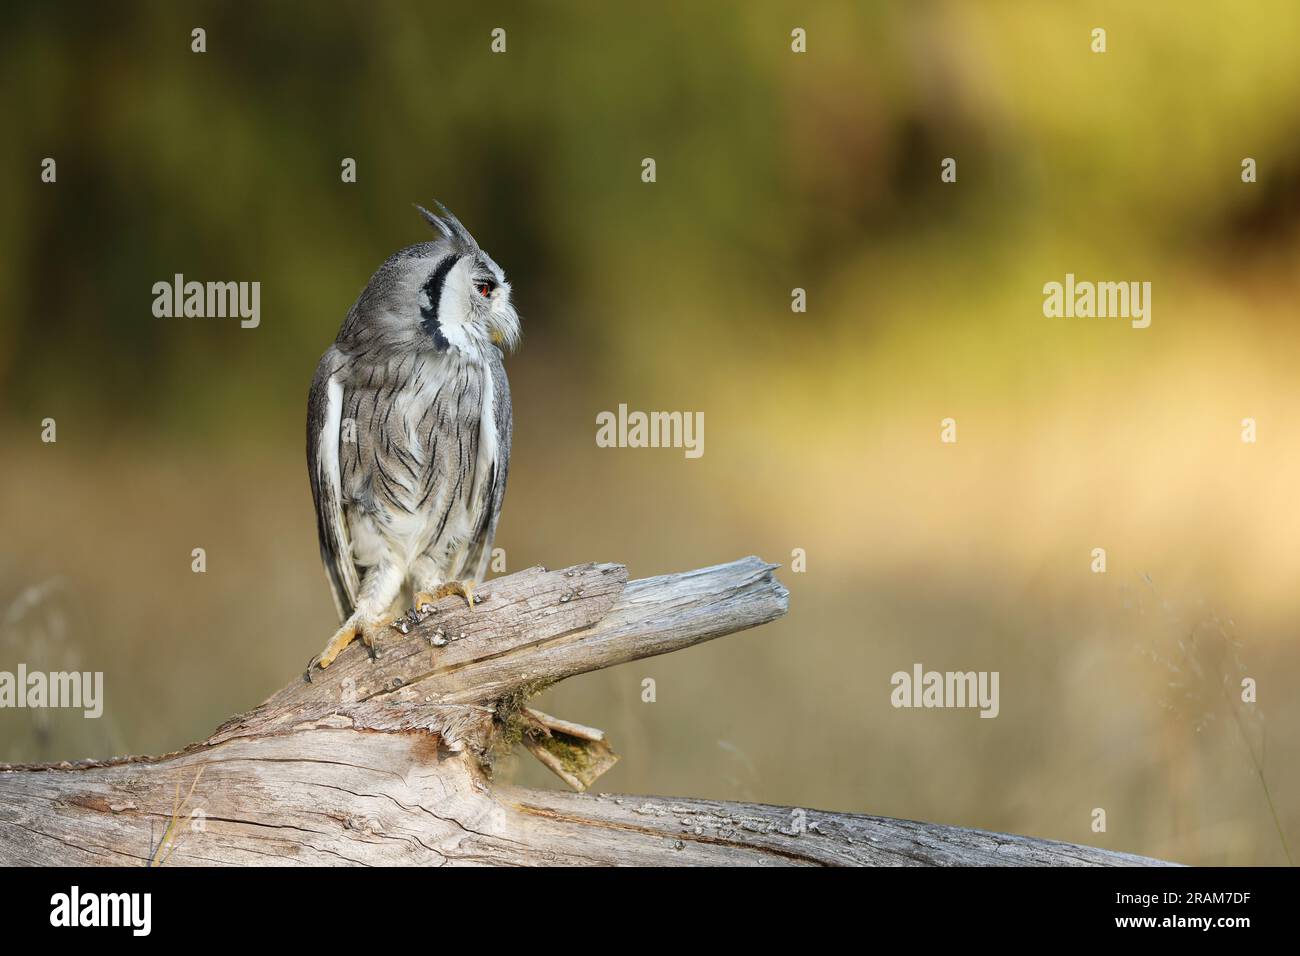 Northern white-faced owl , Ptilopsis leucotis, little owl in the nature habitat, sitting on the tree branch, yellow grass in backgroud Stock Photo